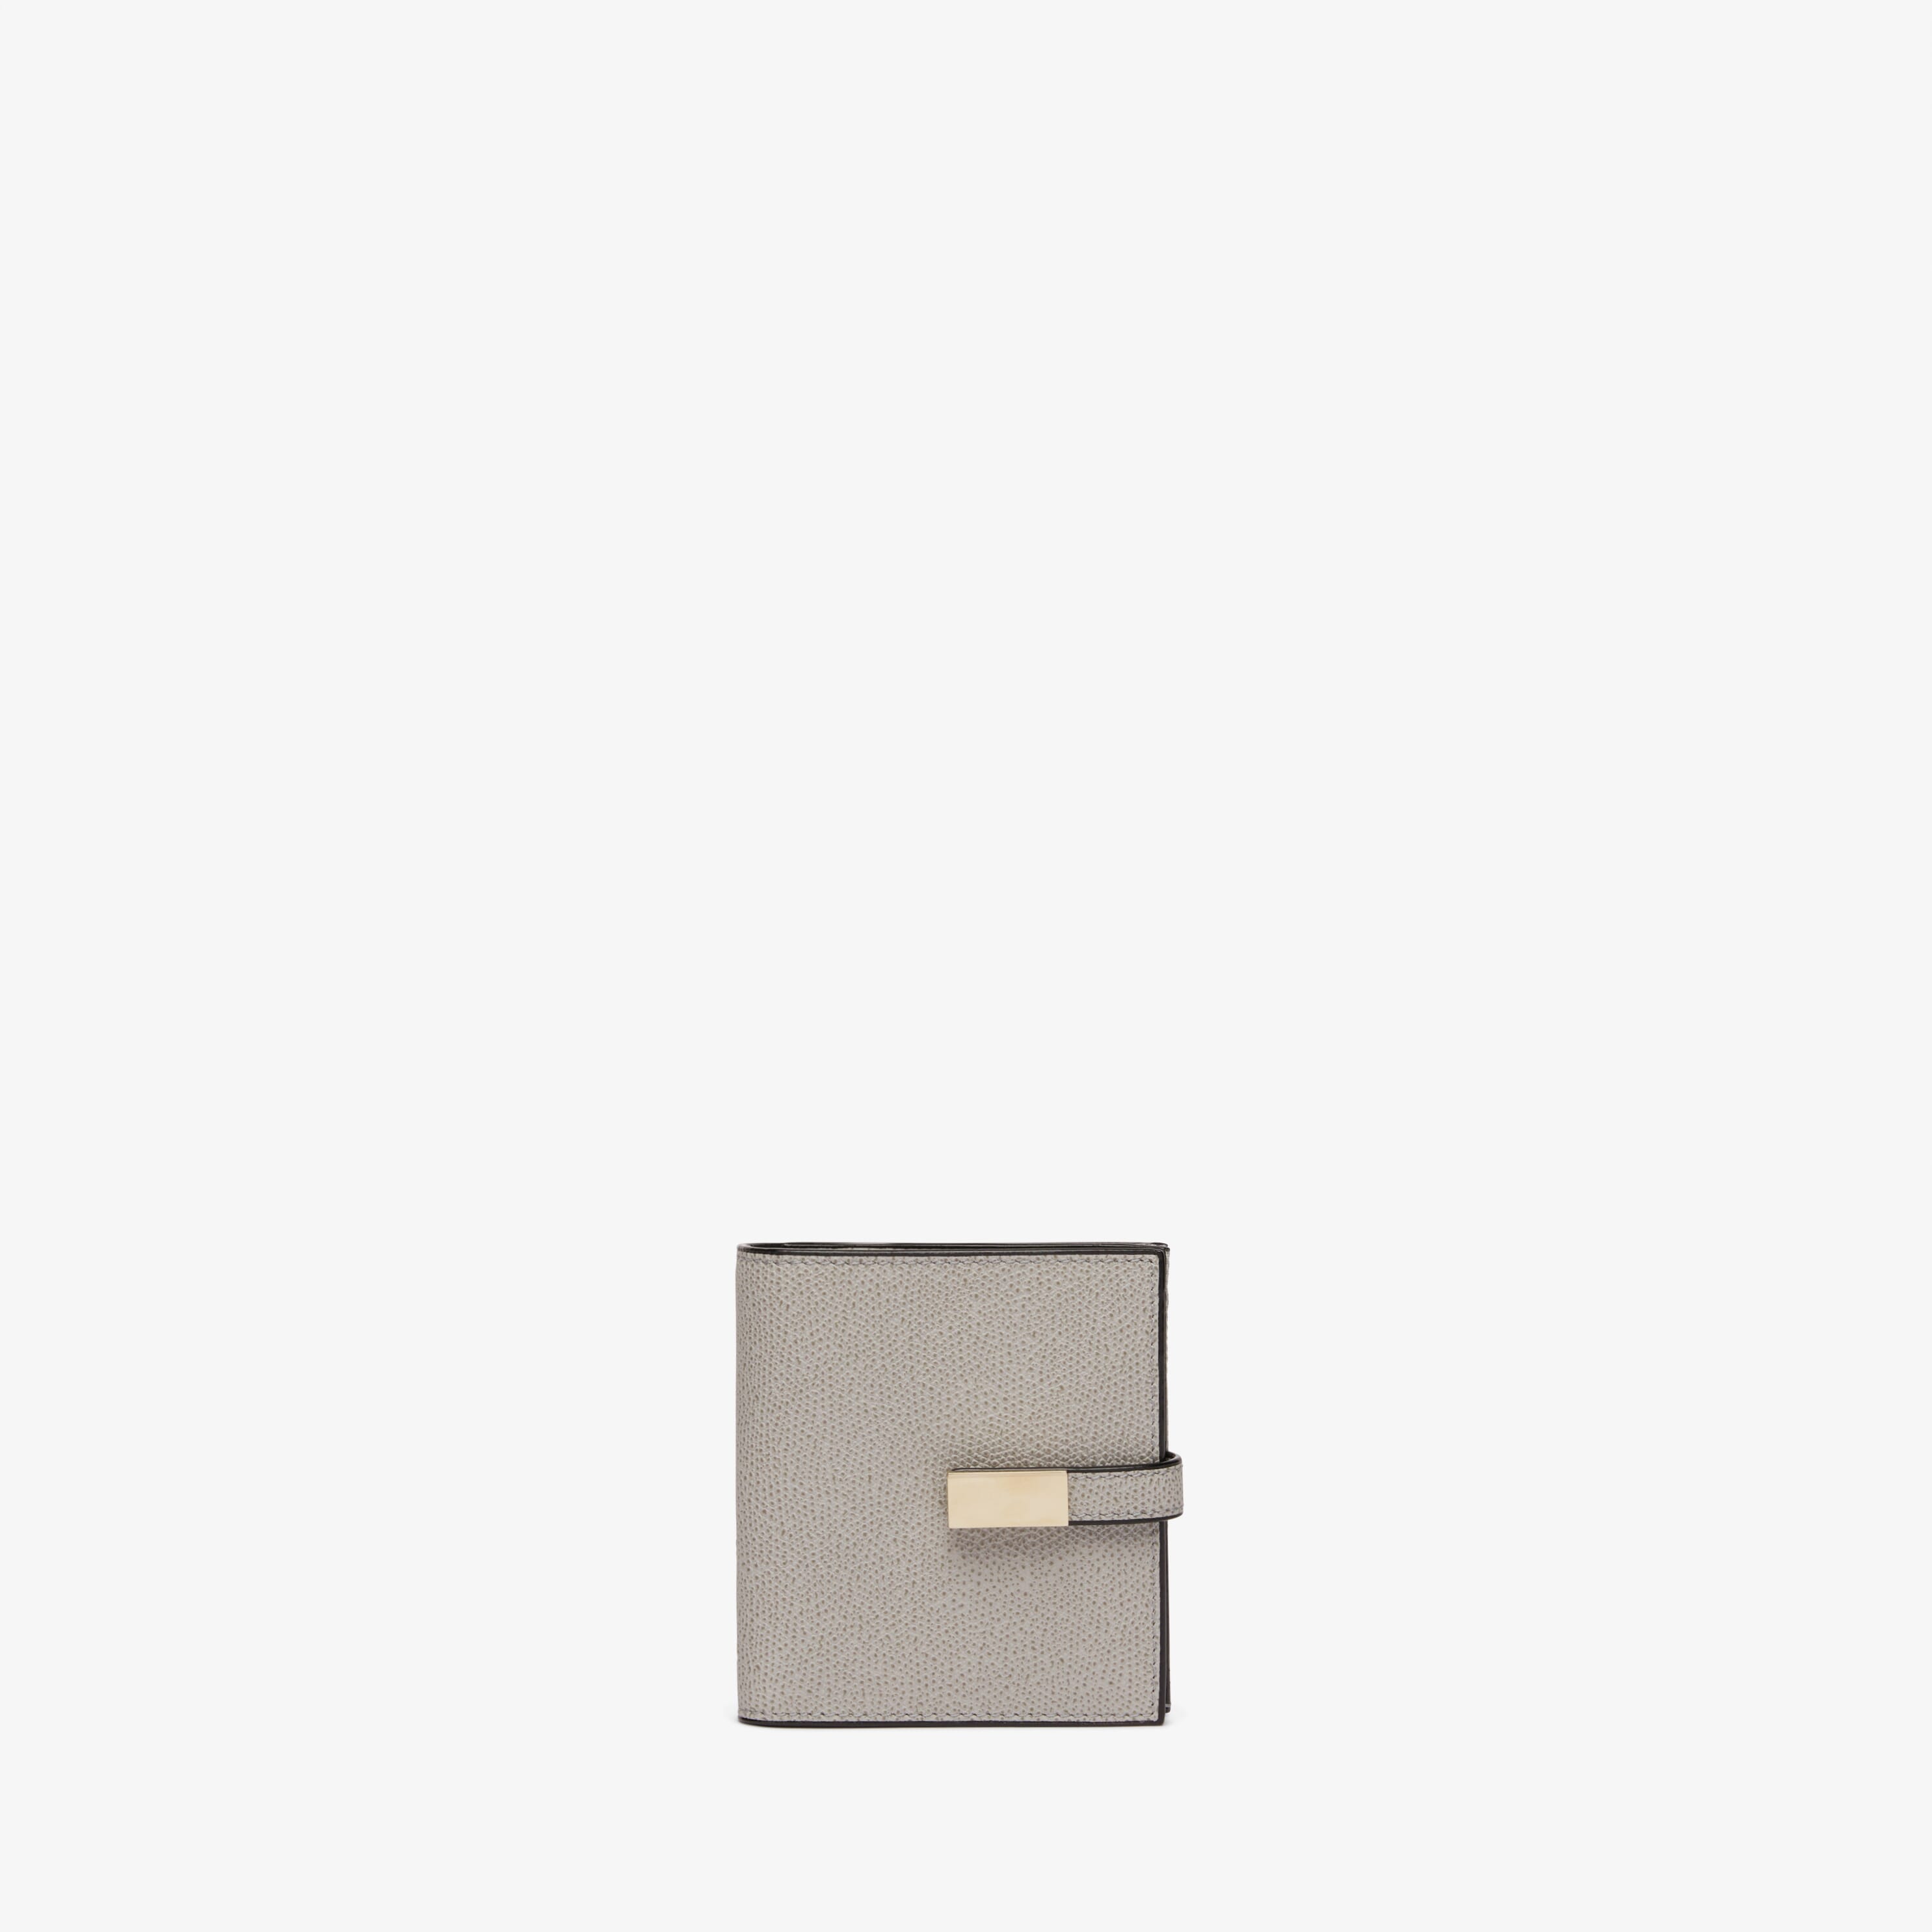 Light Gray Leather Small Purse | Valextra small leather goods